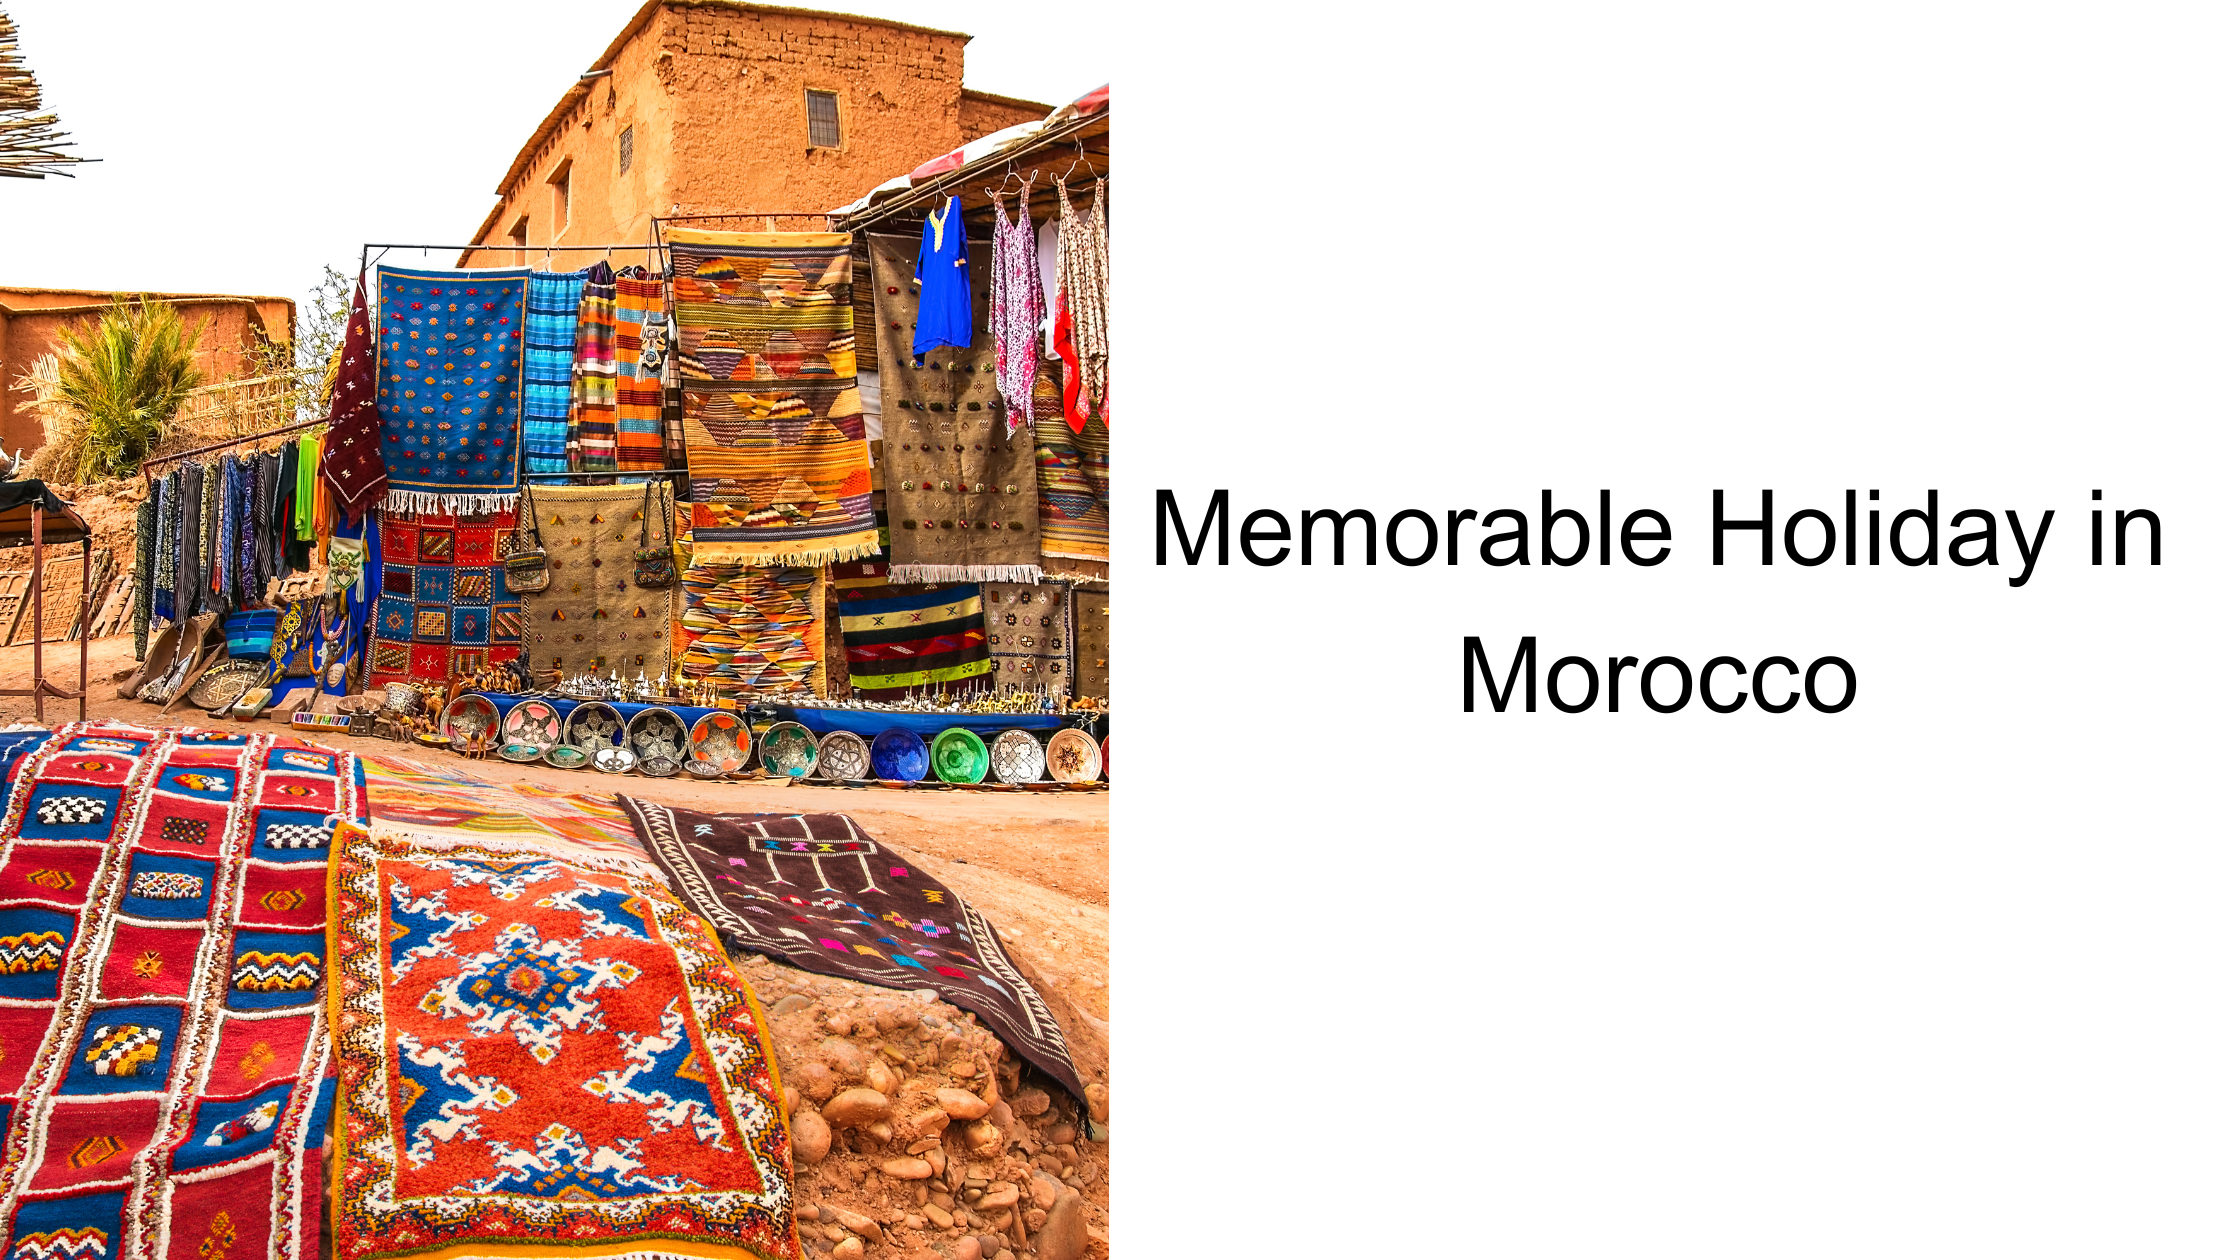 A Memorable Holiday in Morocco